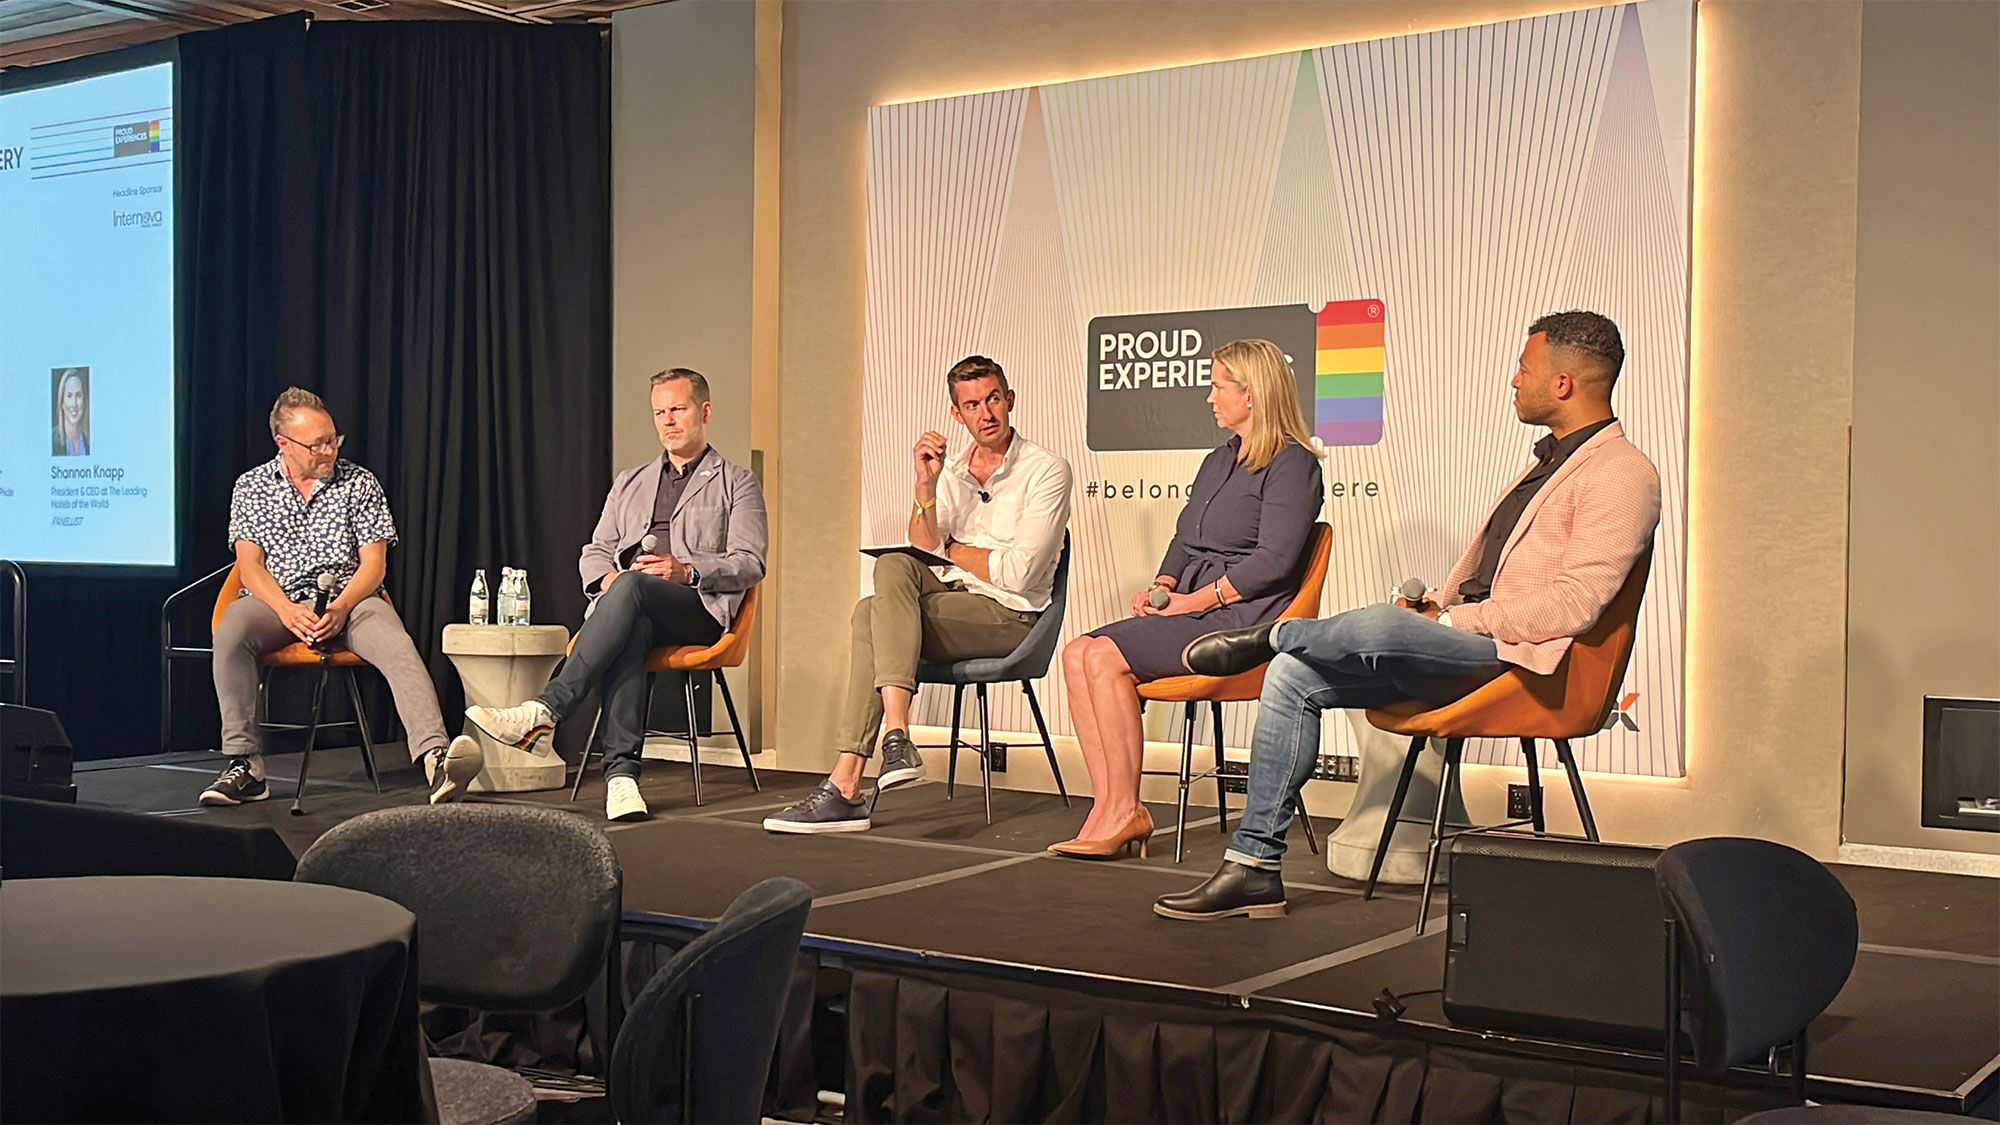 From left, Out Magazine editor in chief Jacob Anderson, NYC & Company CEO Fred Dixon, BBC presenter Ben Thompson, Leading Hotels of the World CEO Shannon Knapp and Manchester Pride CEO Mark Fletcher on a panel at Proud Experiences.